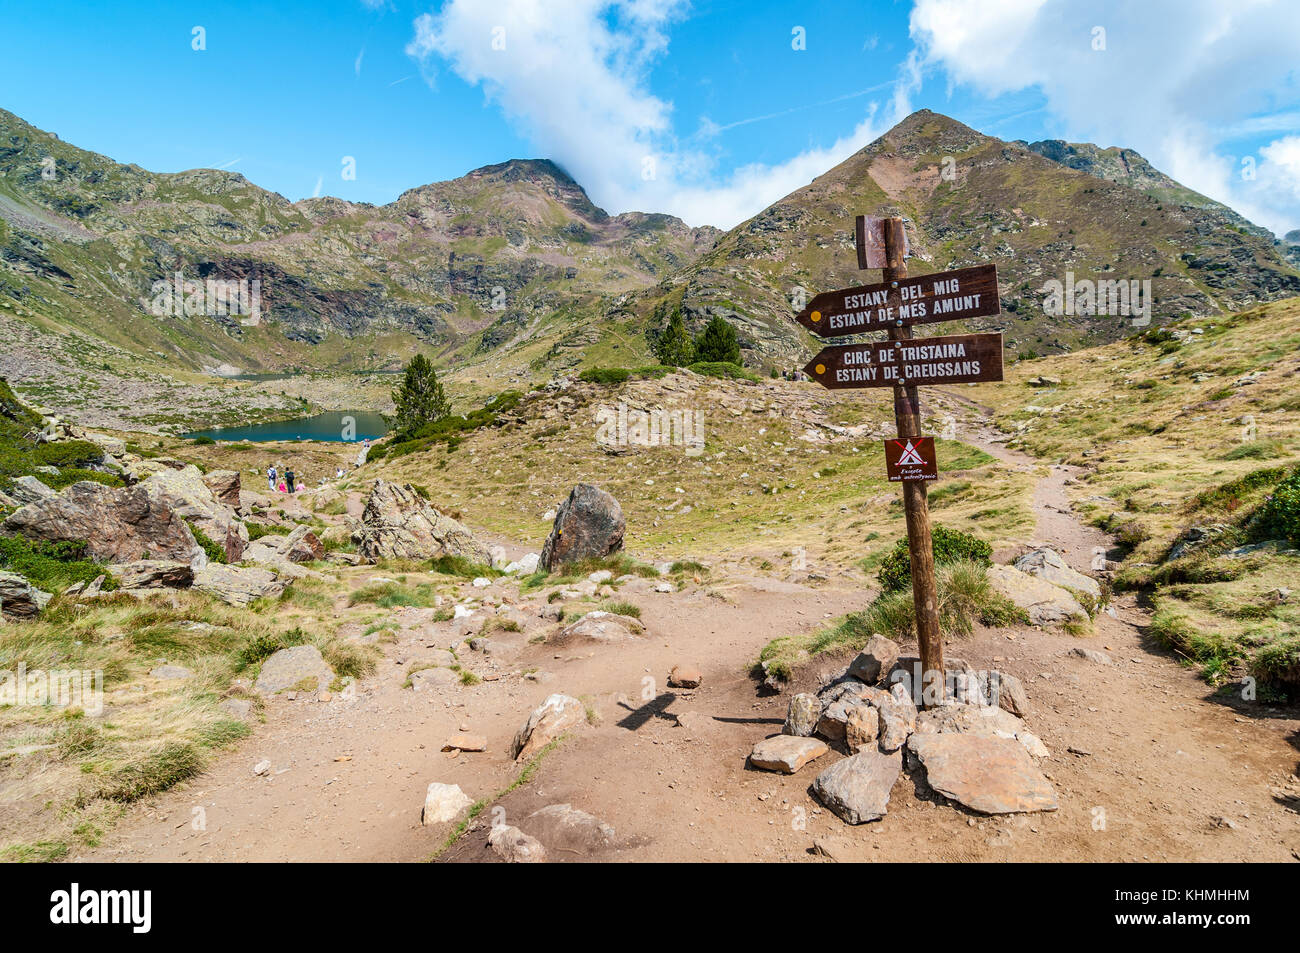 view of high mountain lake called 'Estany del mig' - midle lake with a sign in the foreground,  near Ordino, Tristaina, Andorra Stock Photo